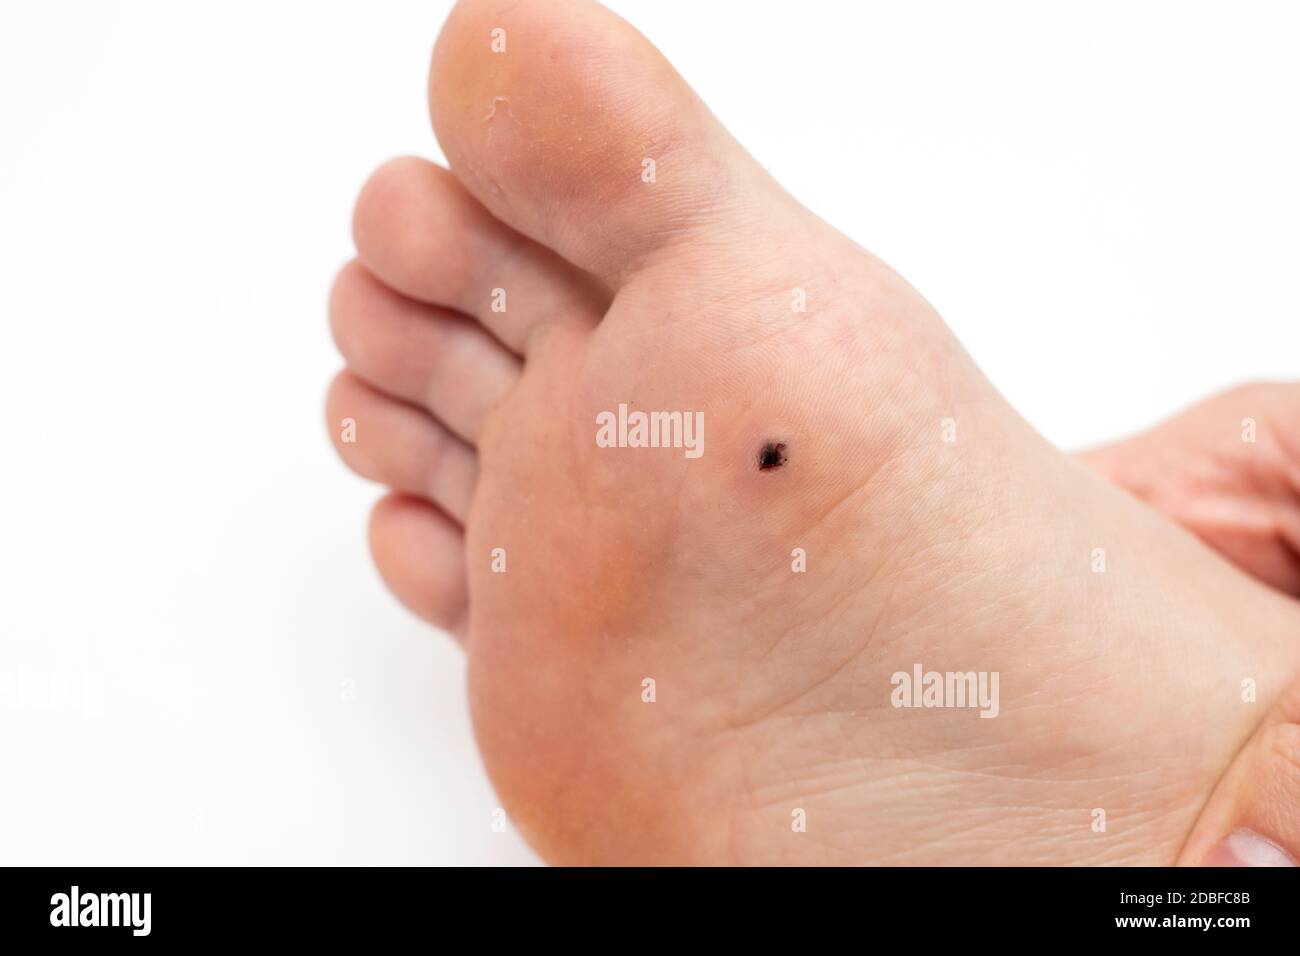 Wart on the sole of the foot. Removal of a plantar wart. Stock Photo